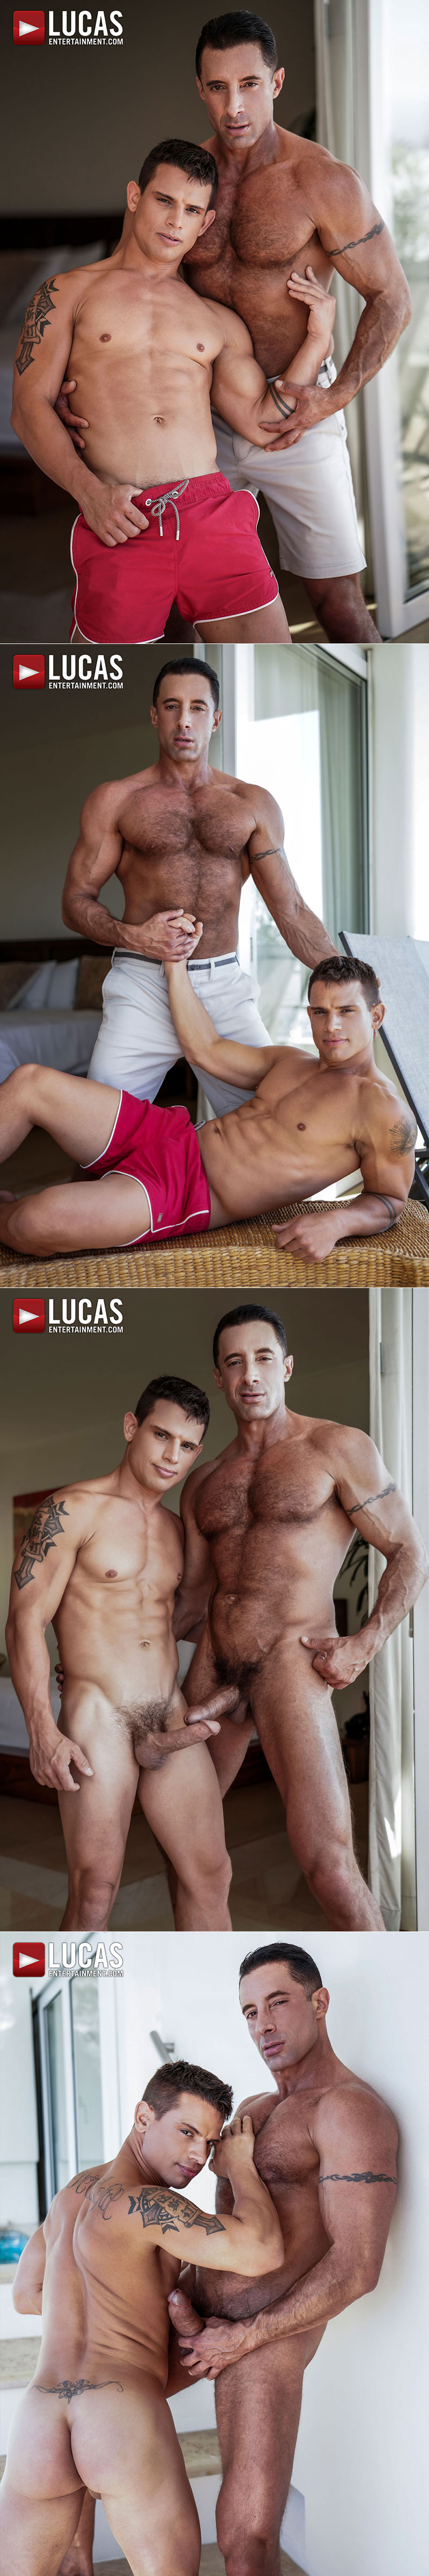 Lucas Entertainment: Brent Everett and Nick Capra flip fuck raw in "Quality Time With Daddy"